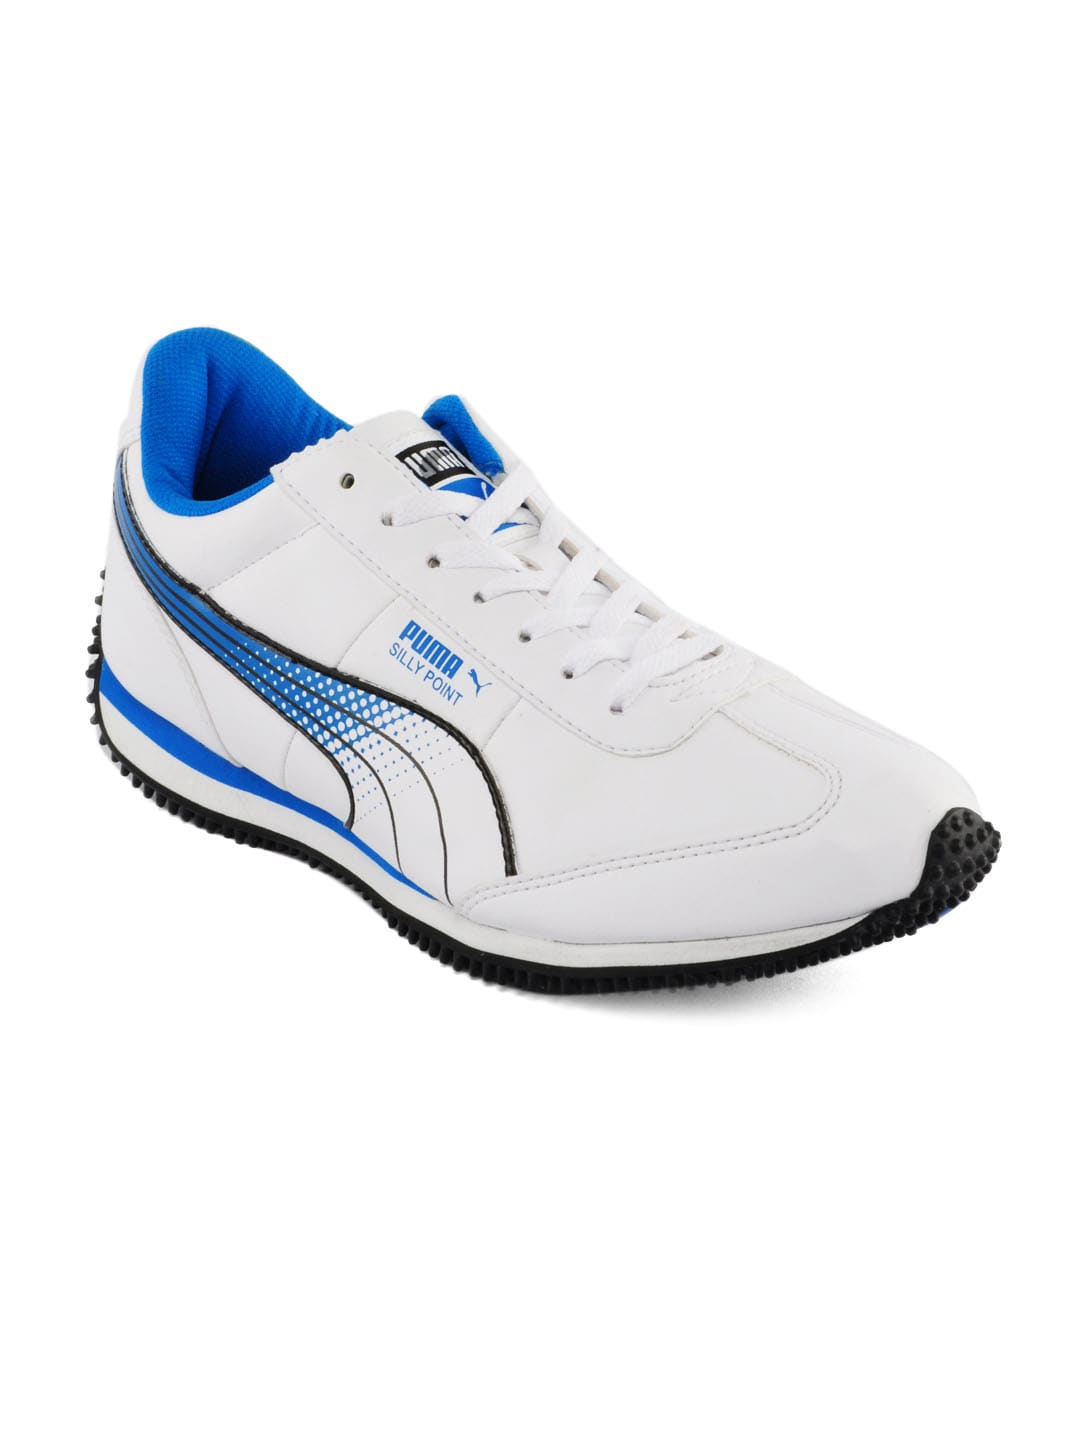 Puma Men Silly Point White Sports Shoes